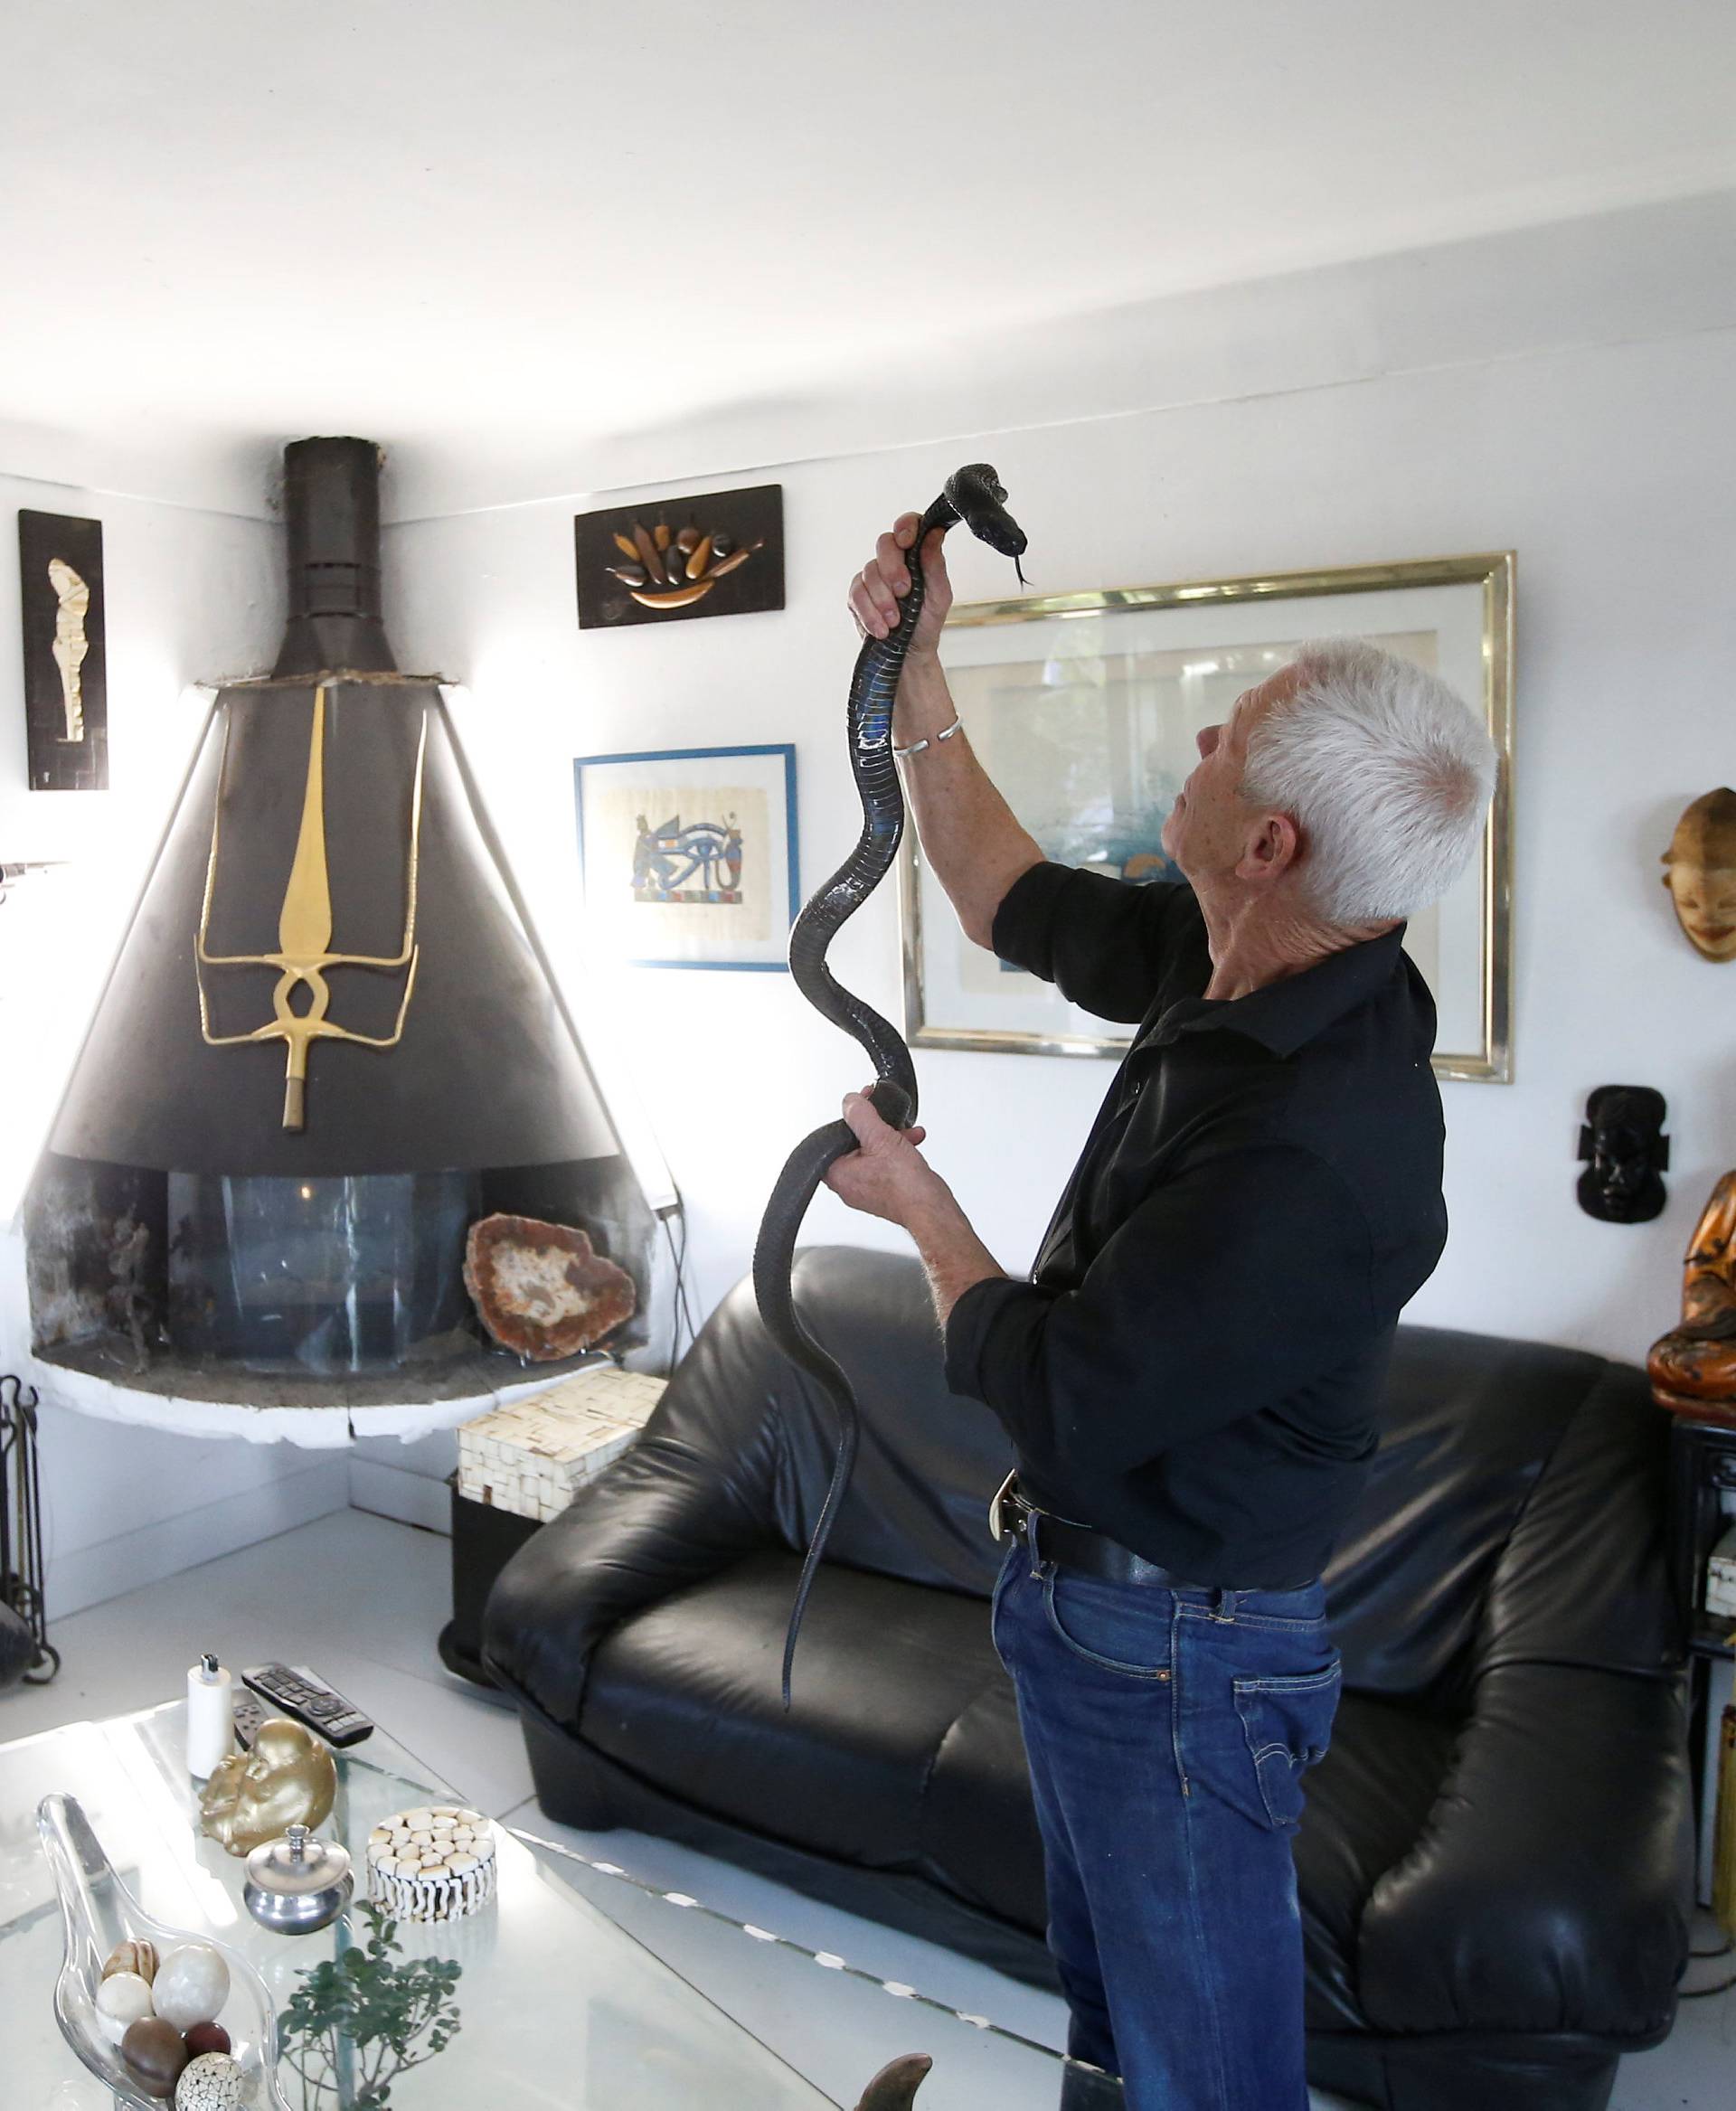 Philippe Gillet, 67 year-old Frenchman who lives with more than 400 reptiles and tamed alligators, looks at his black cobra in his living room in Coueron near Nantes